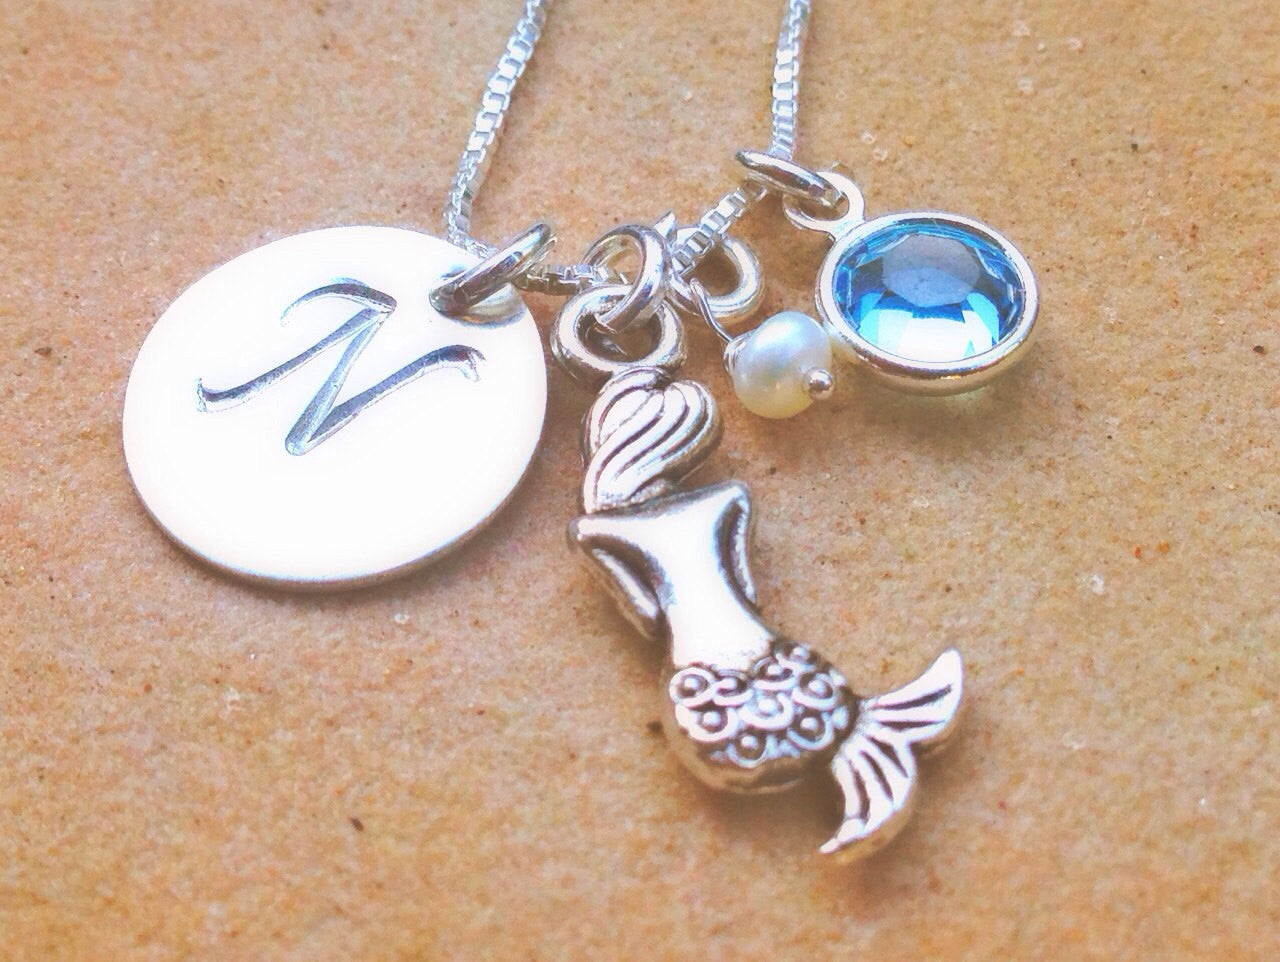 Mermaid Necklace, Initial Necklace, Personalized Mermaid Necklace, Natashaaloha - Natashaaloha, jewelry, bracelets, necklace, keychains, fishing lures, gifts for men, charms, personalized, 